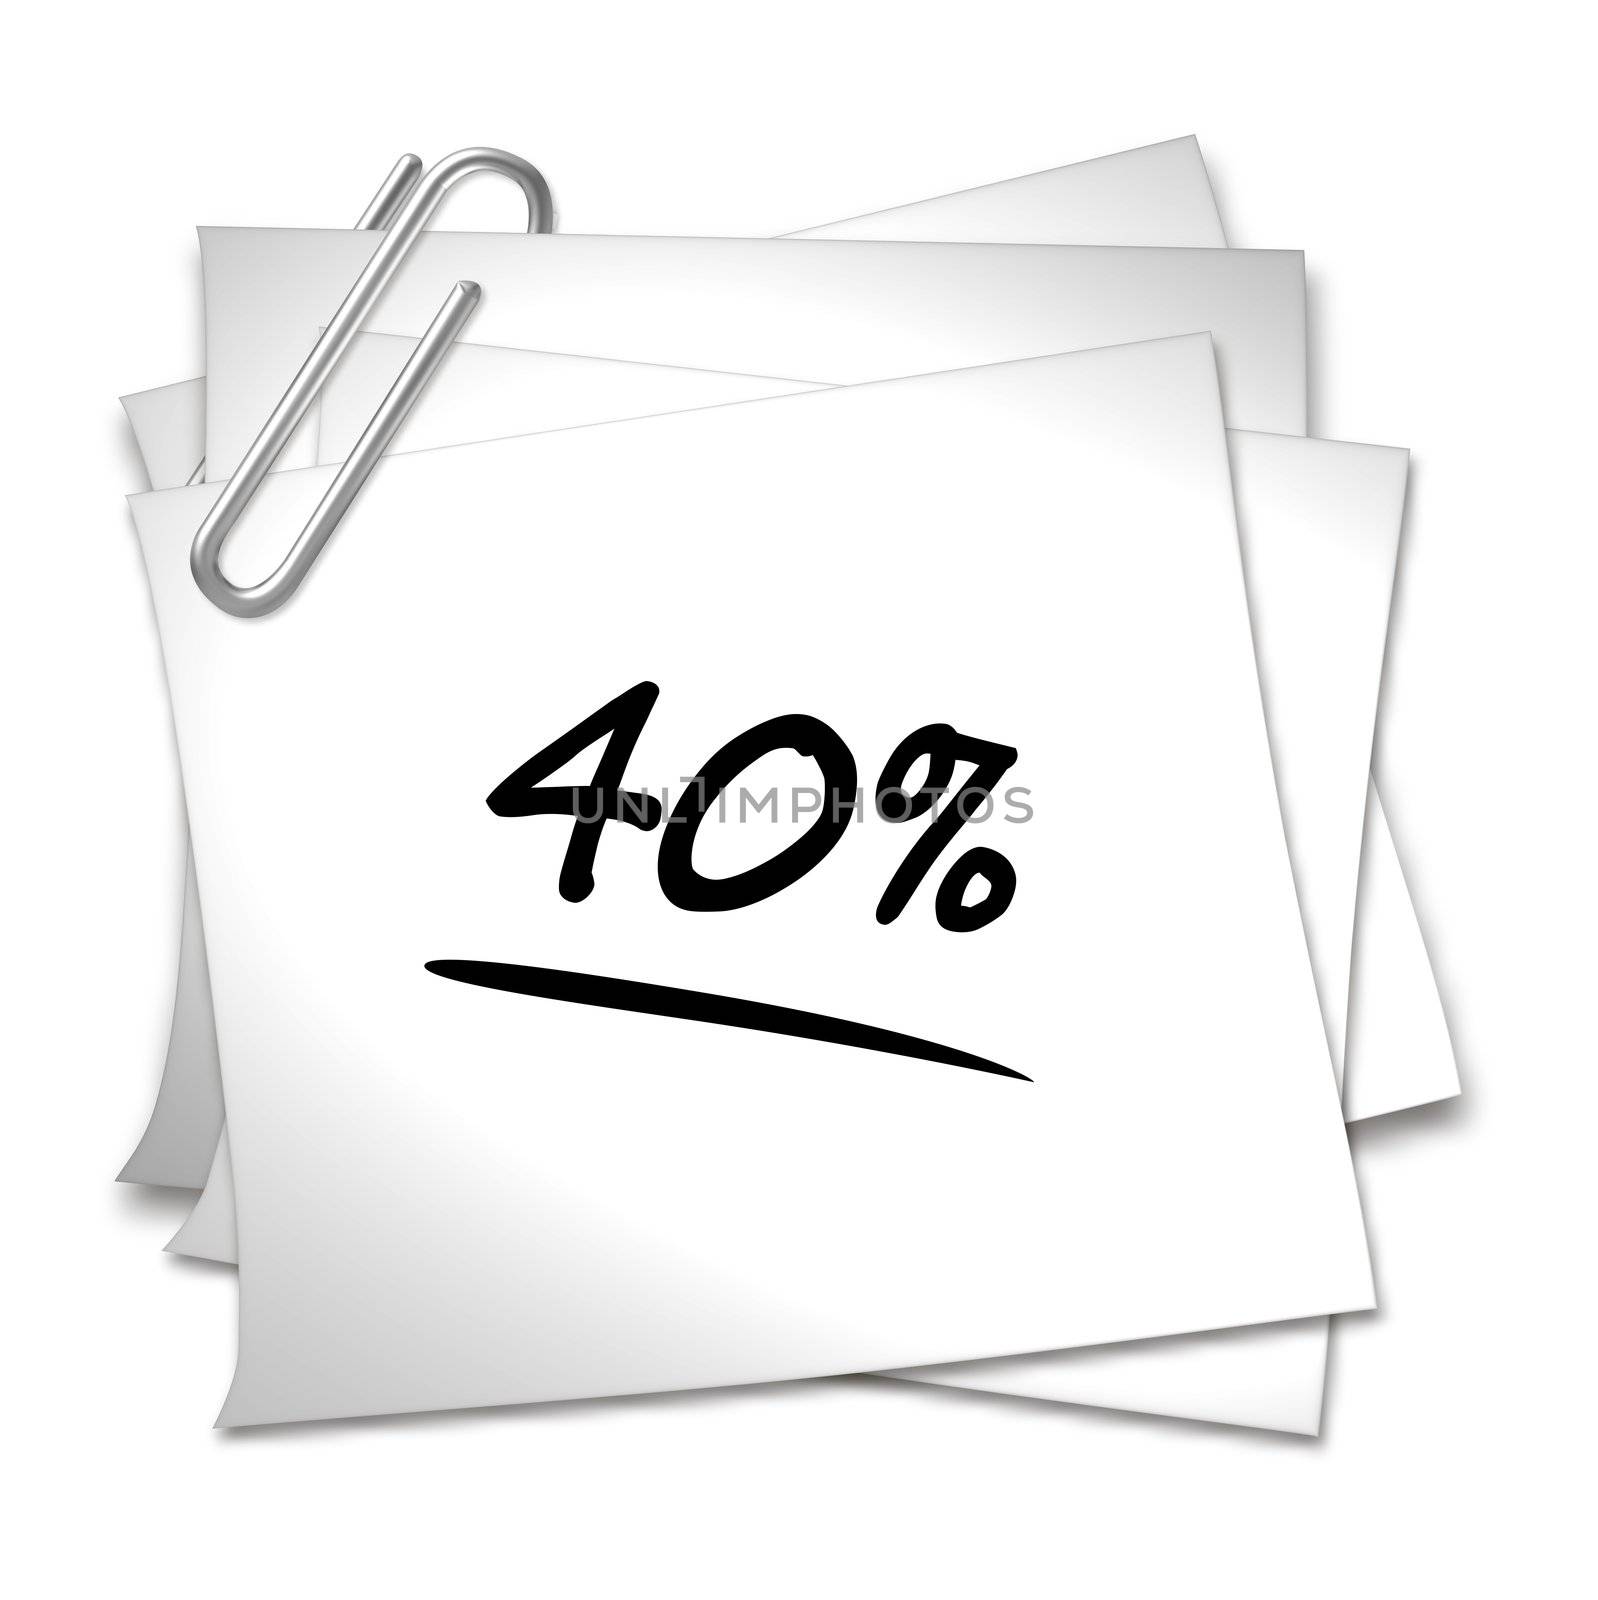 Memo with Paper Clip - 40 % by peromarketing